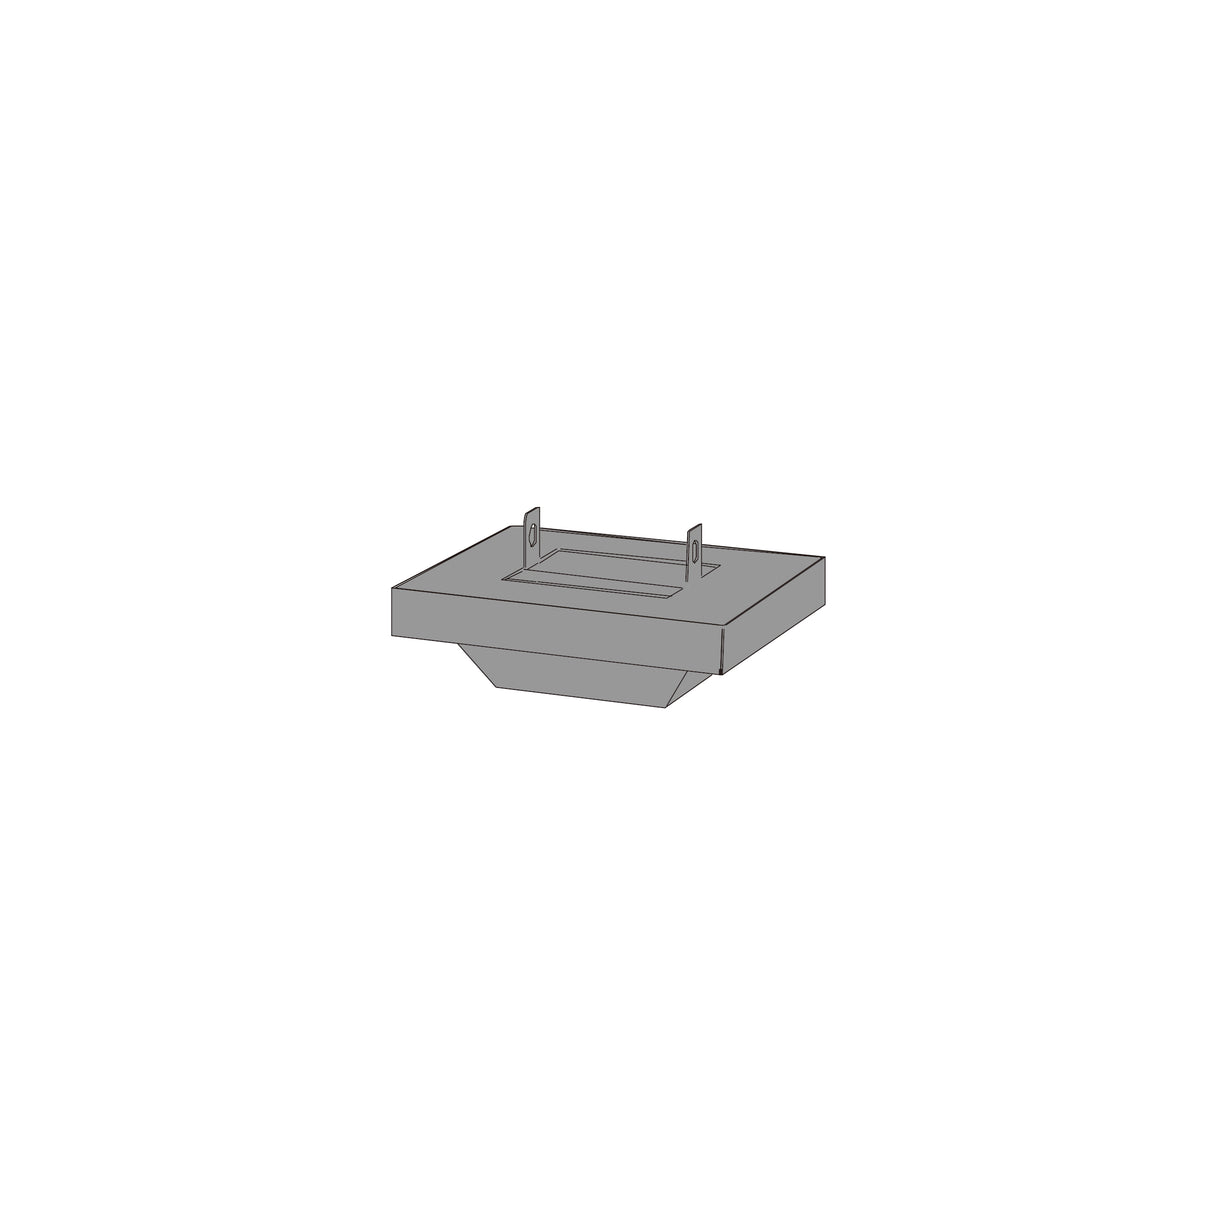 PG127TEX-Part D4 Top Cover for Post